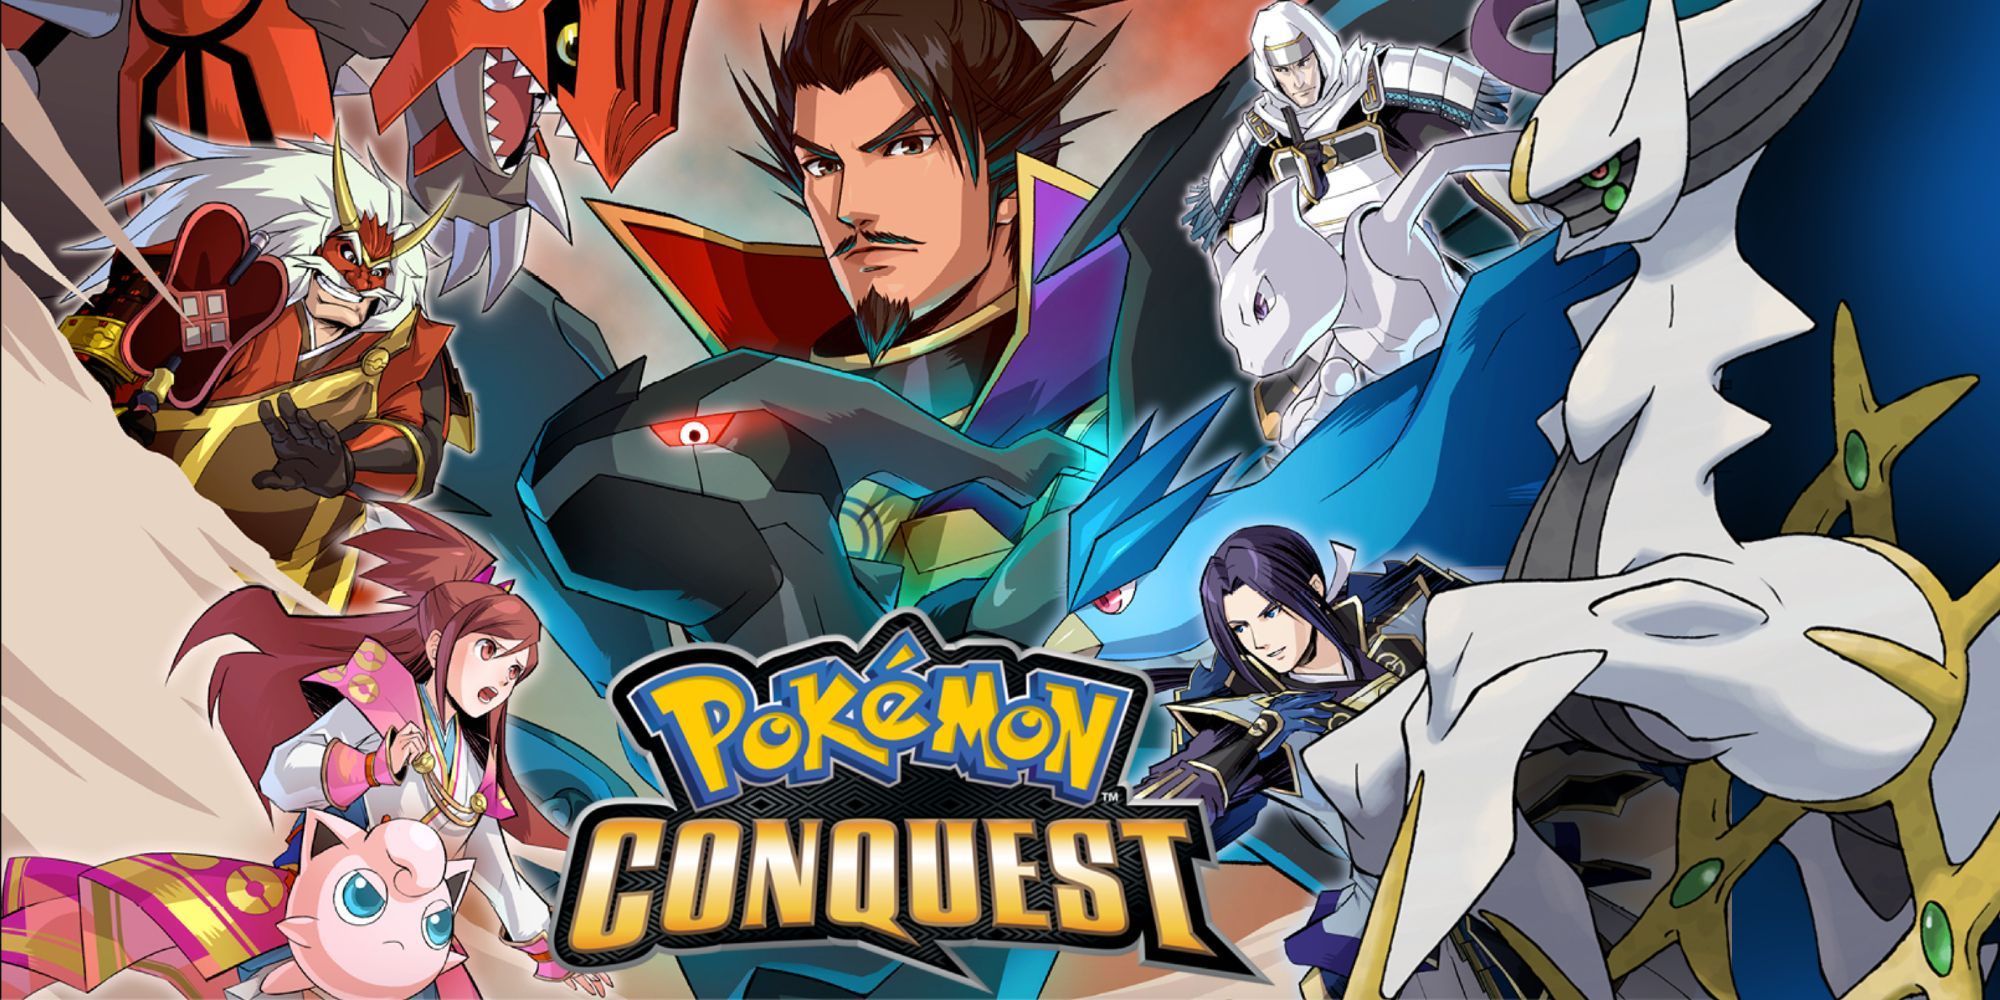 Promo art featuring characters from Pokemon Conquest